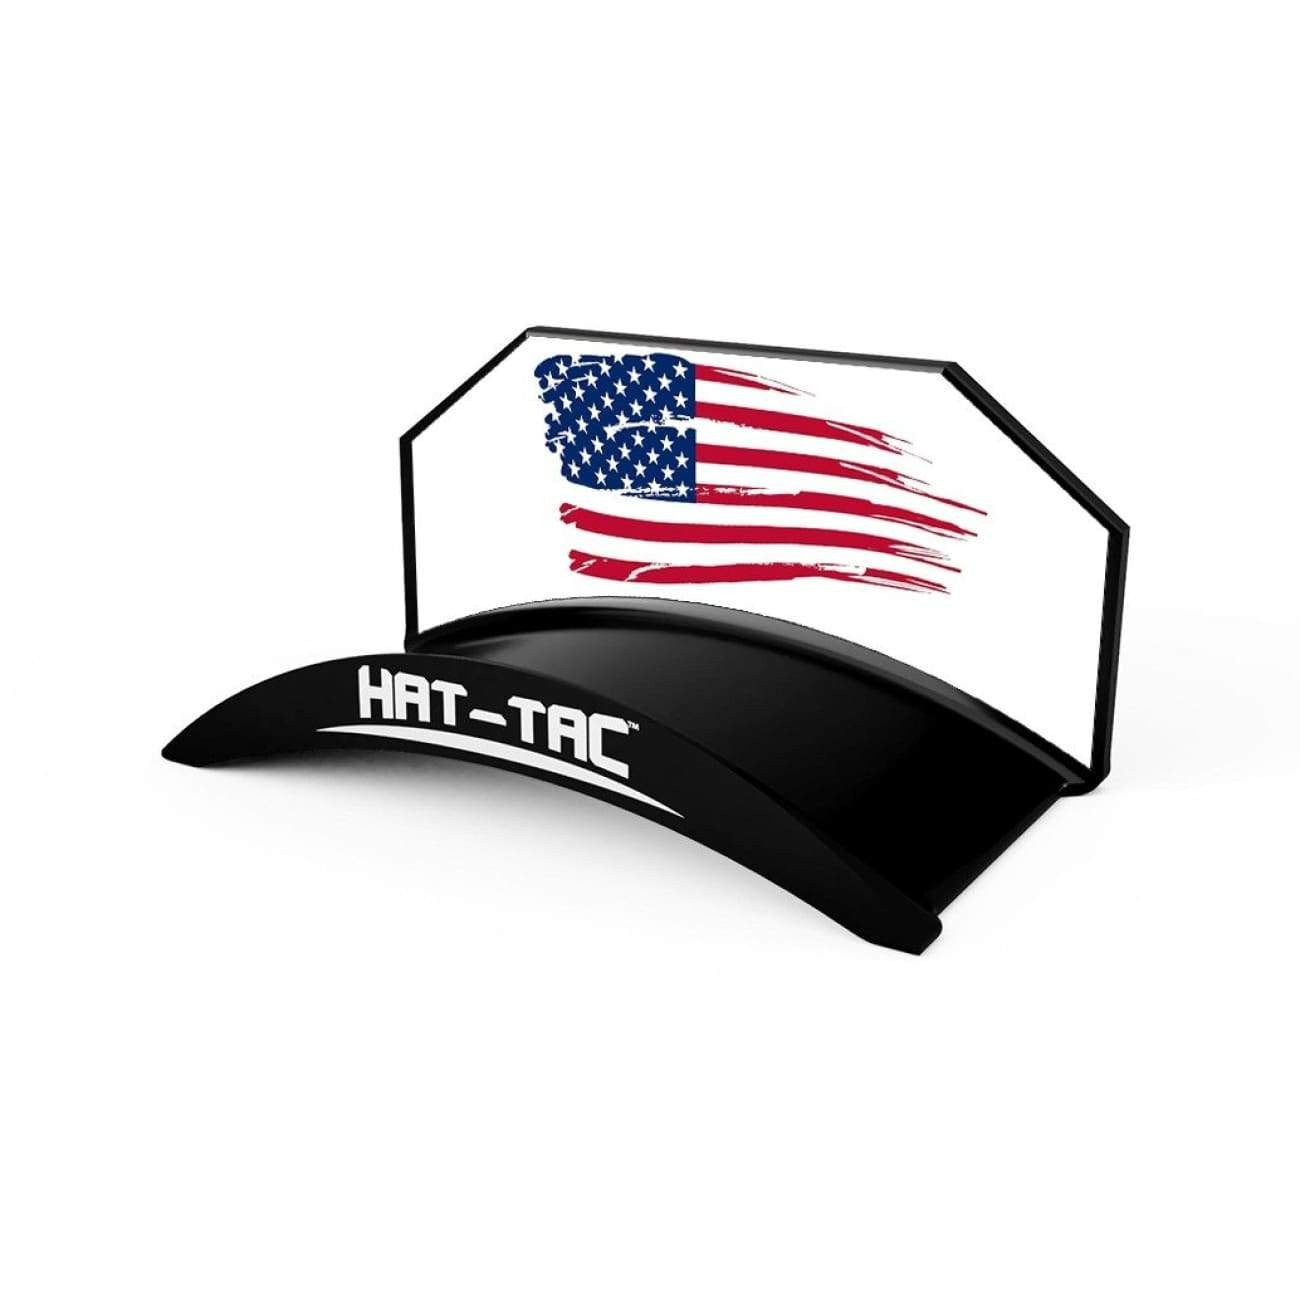 American Collection  Individual / Freedom hat-tac.myshopify.com